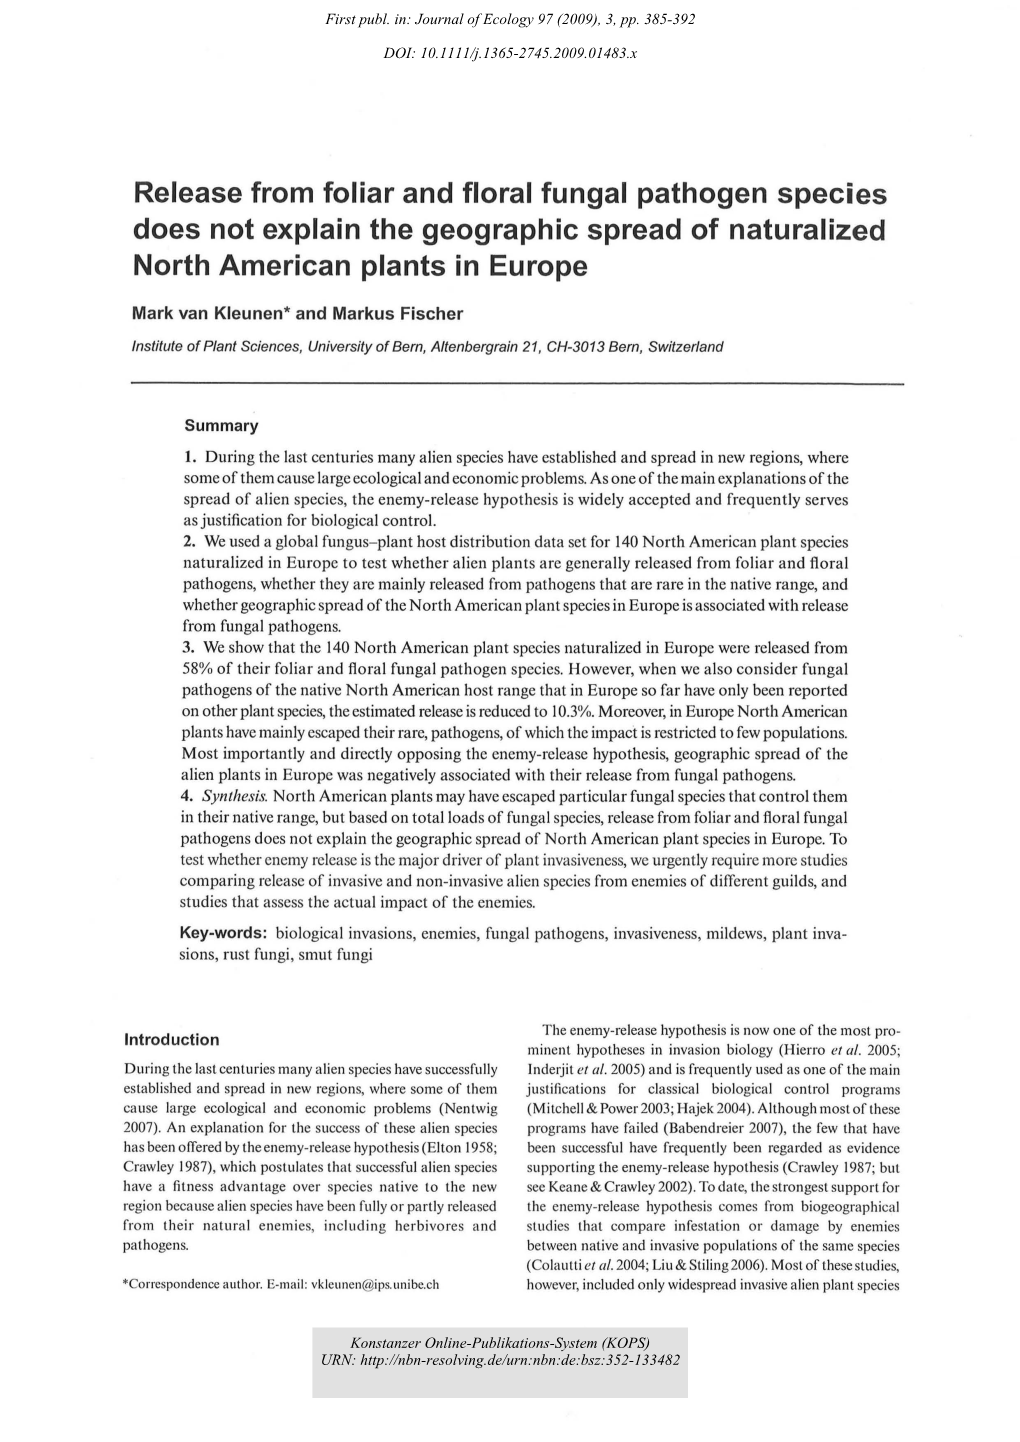 Release from Foliar and Floral Fungal Pathogen Species Does Not Explain the Geographic Spread of Naturalized North American Plants in Europe